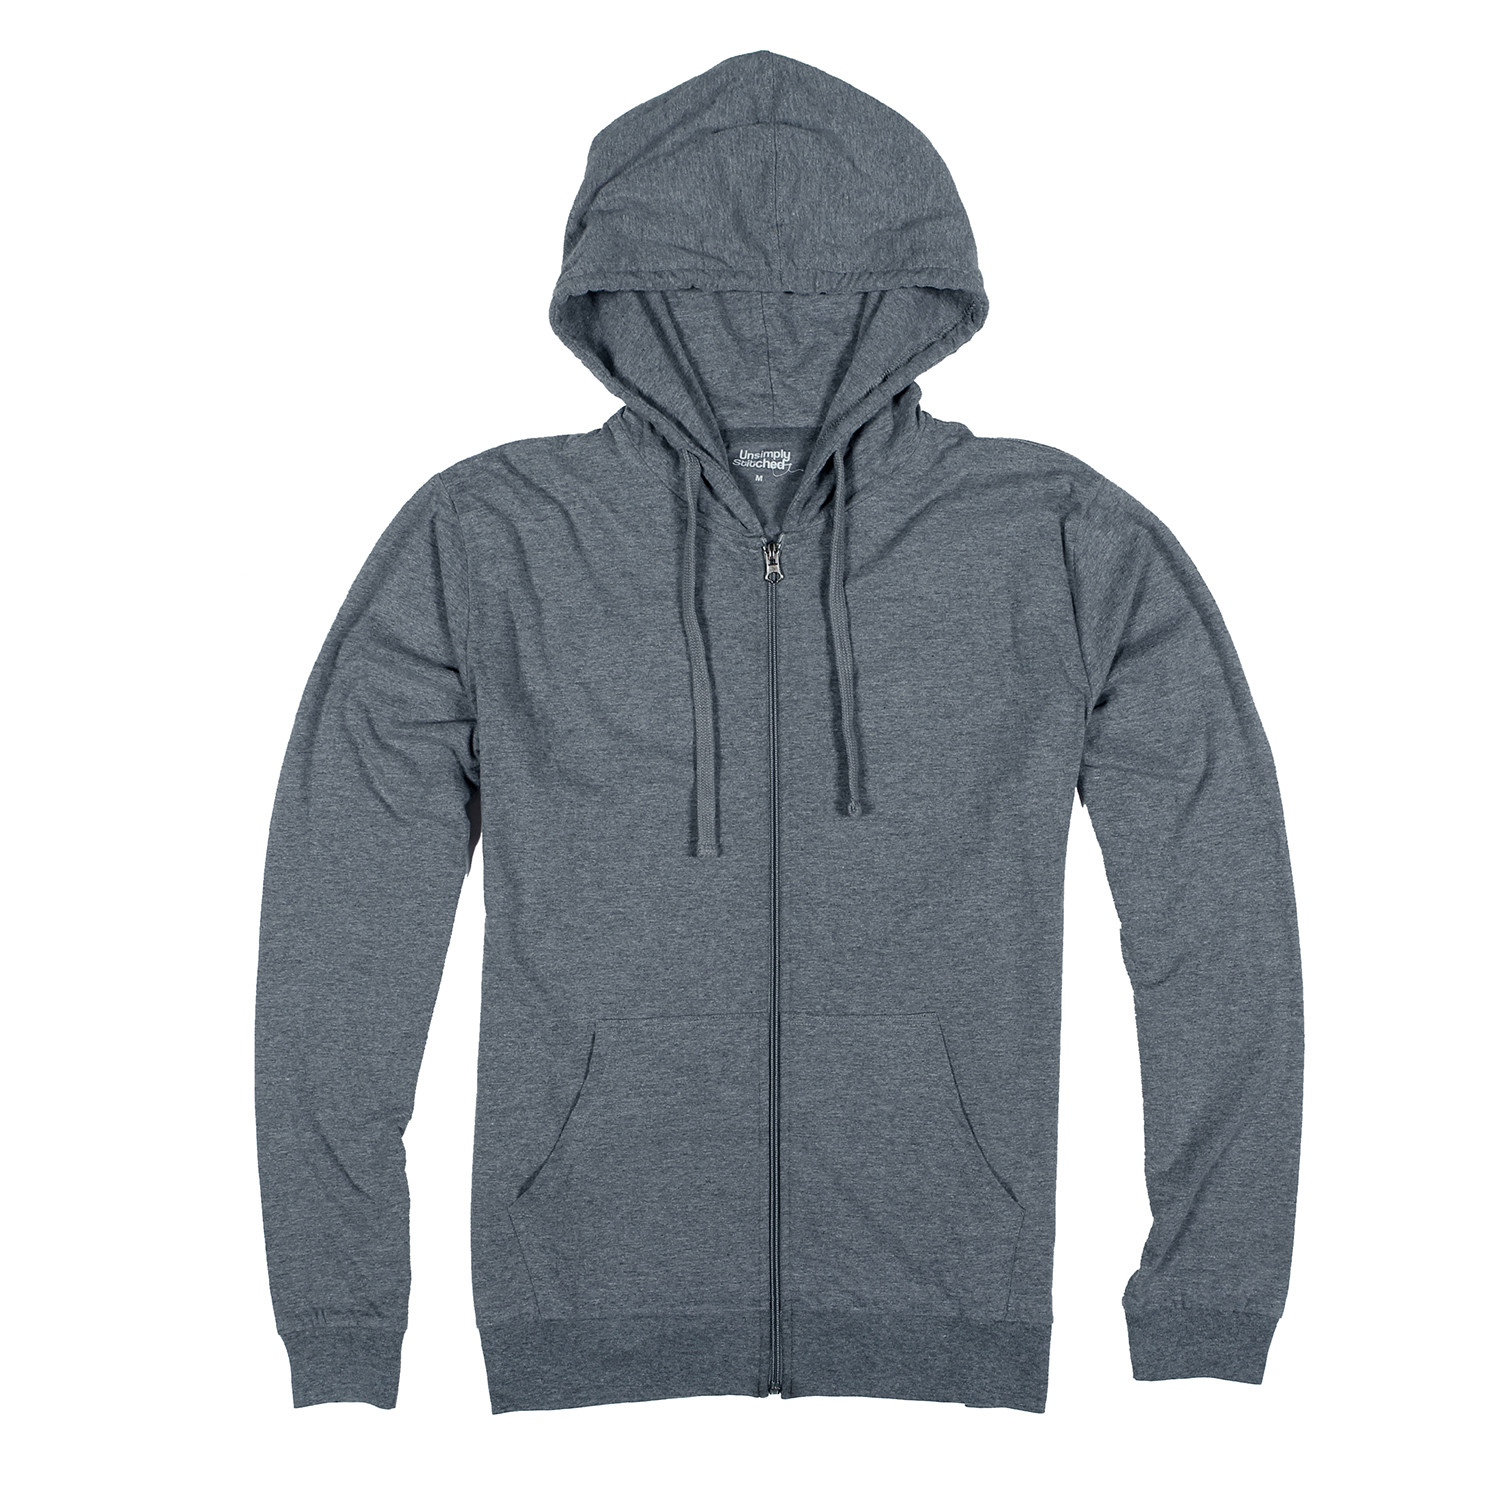 Lightweight Zip Up Hoodie // Heather Blue (S) - Unsimply Stitched ...